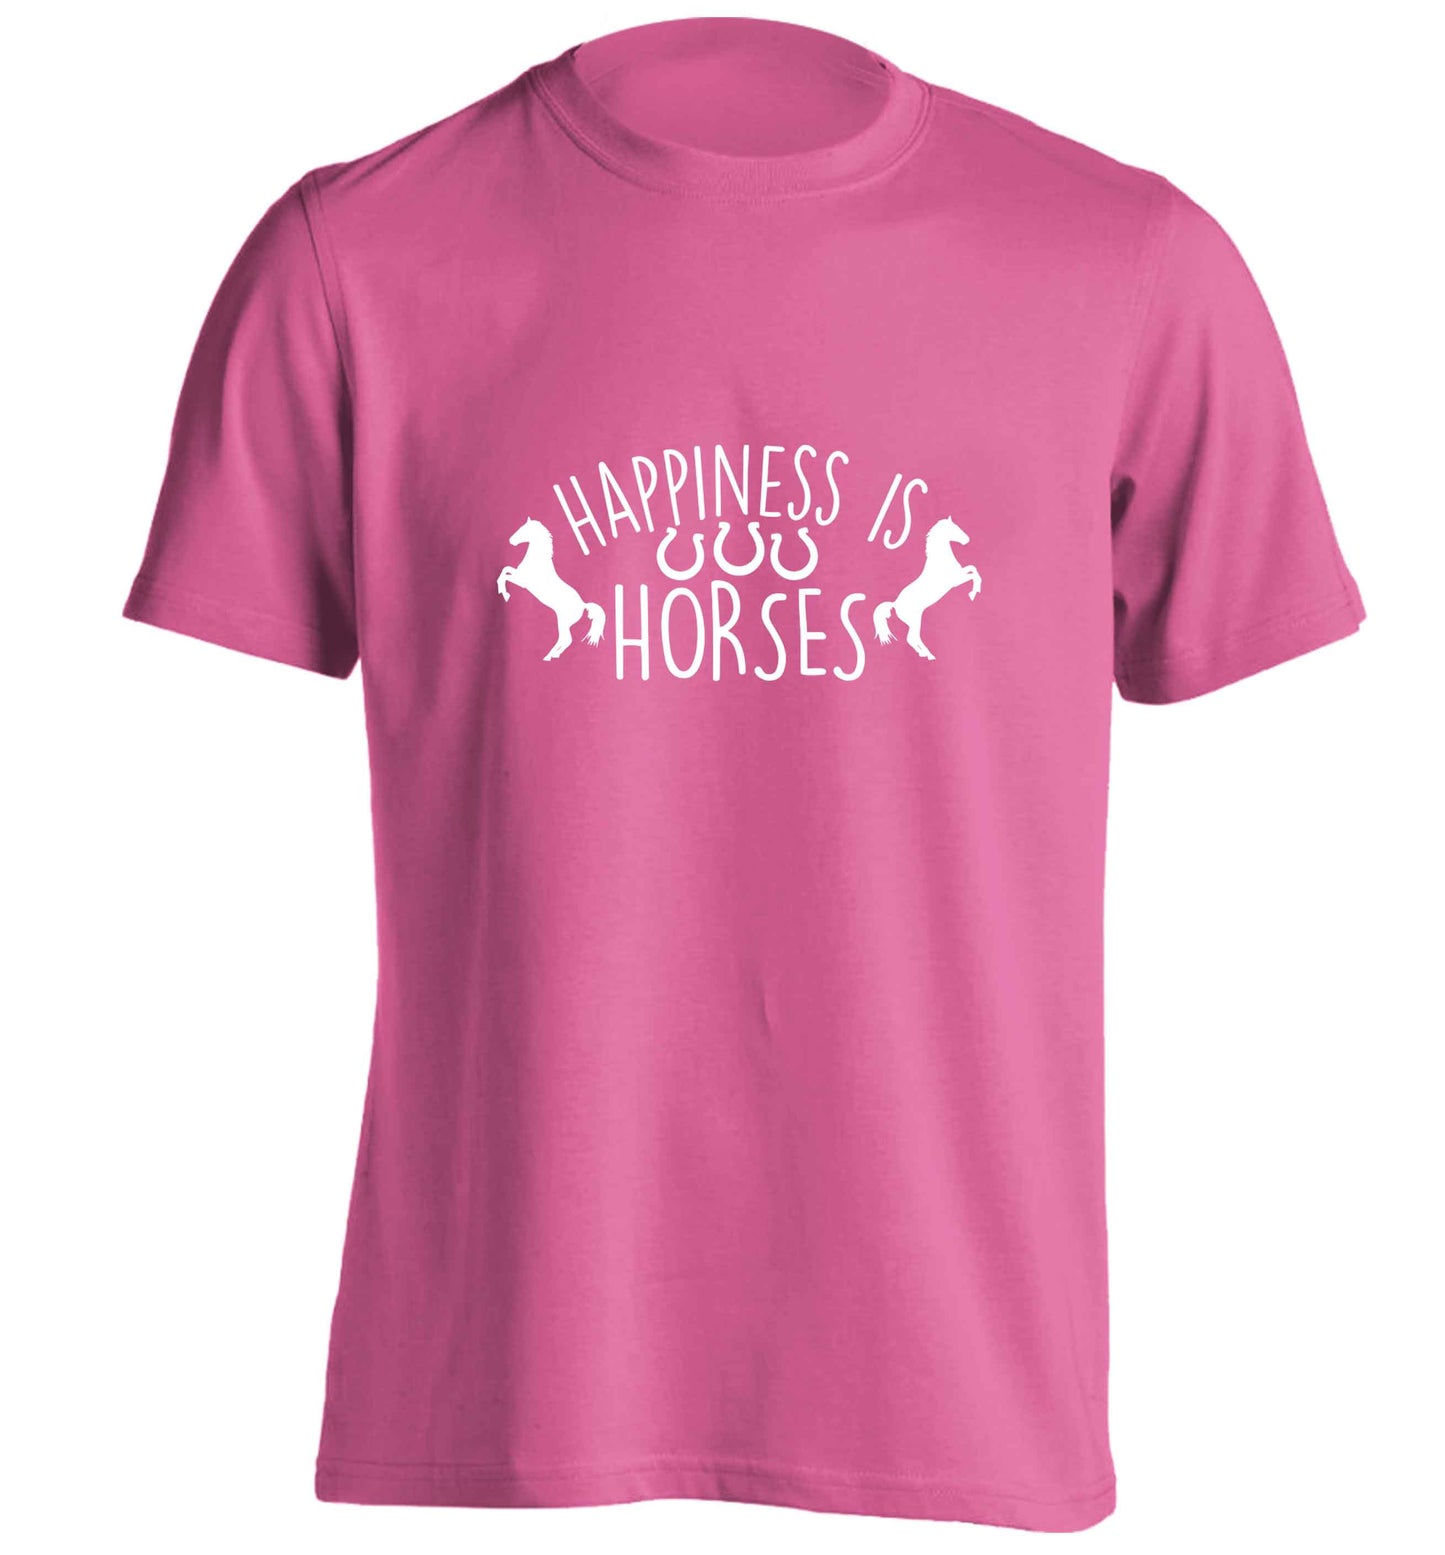 Happiness is horses adults unisex pink Tshirt 2XL